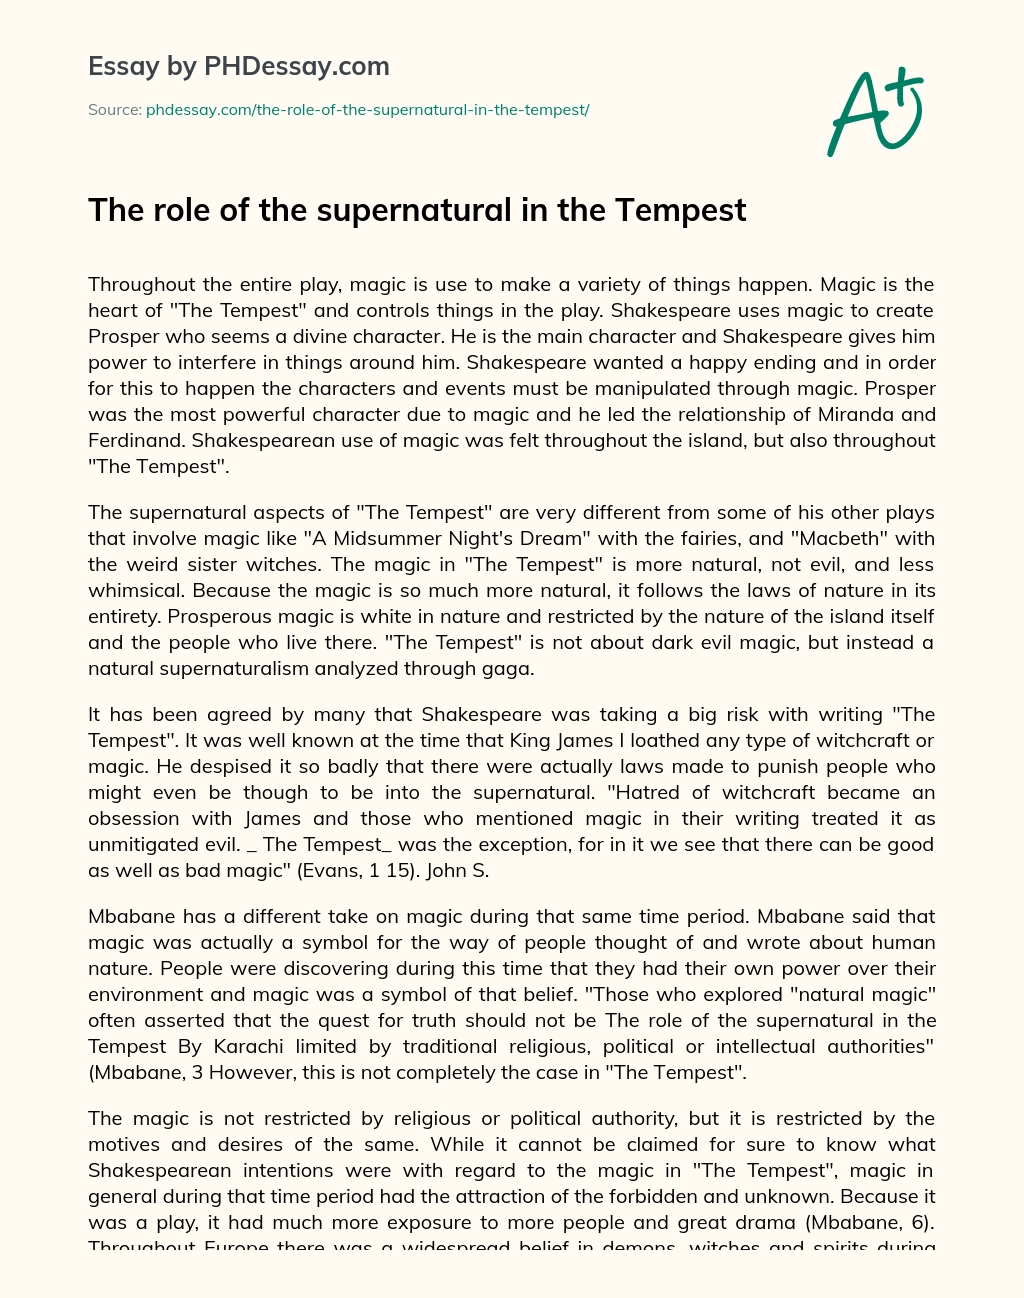 The role of the supernatural in the Tempest essay